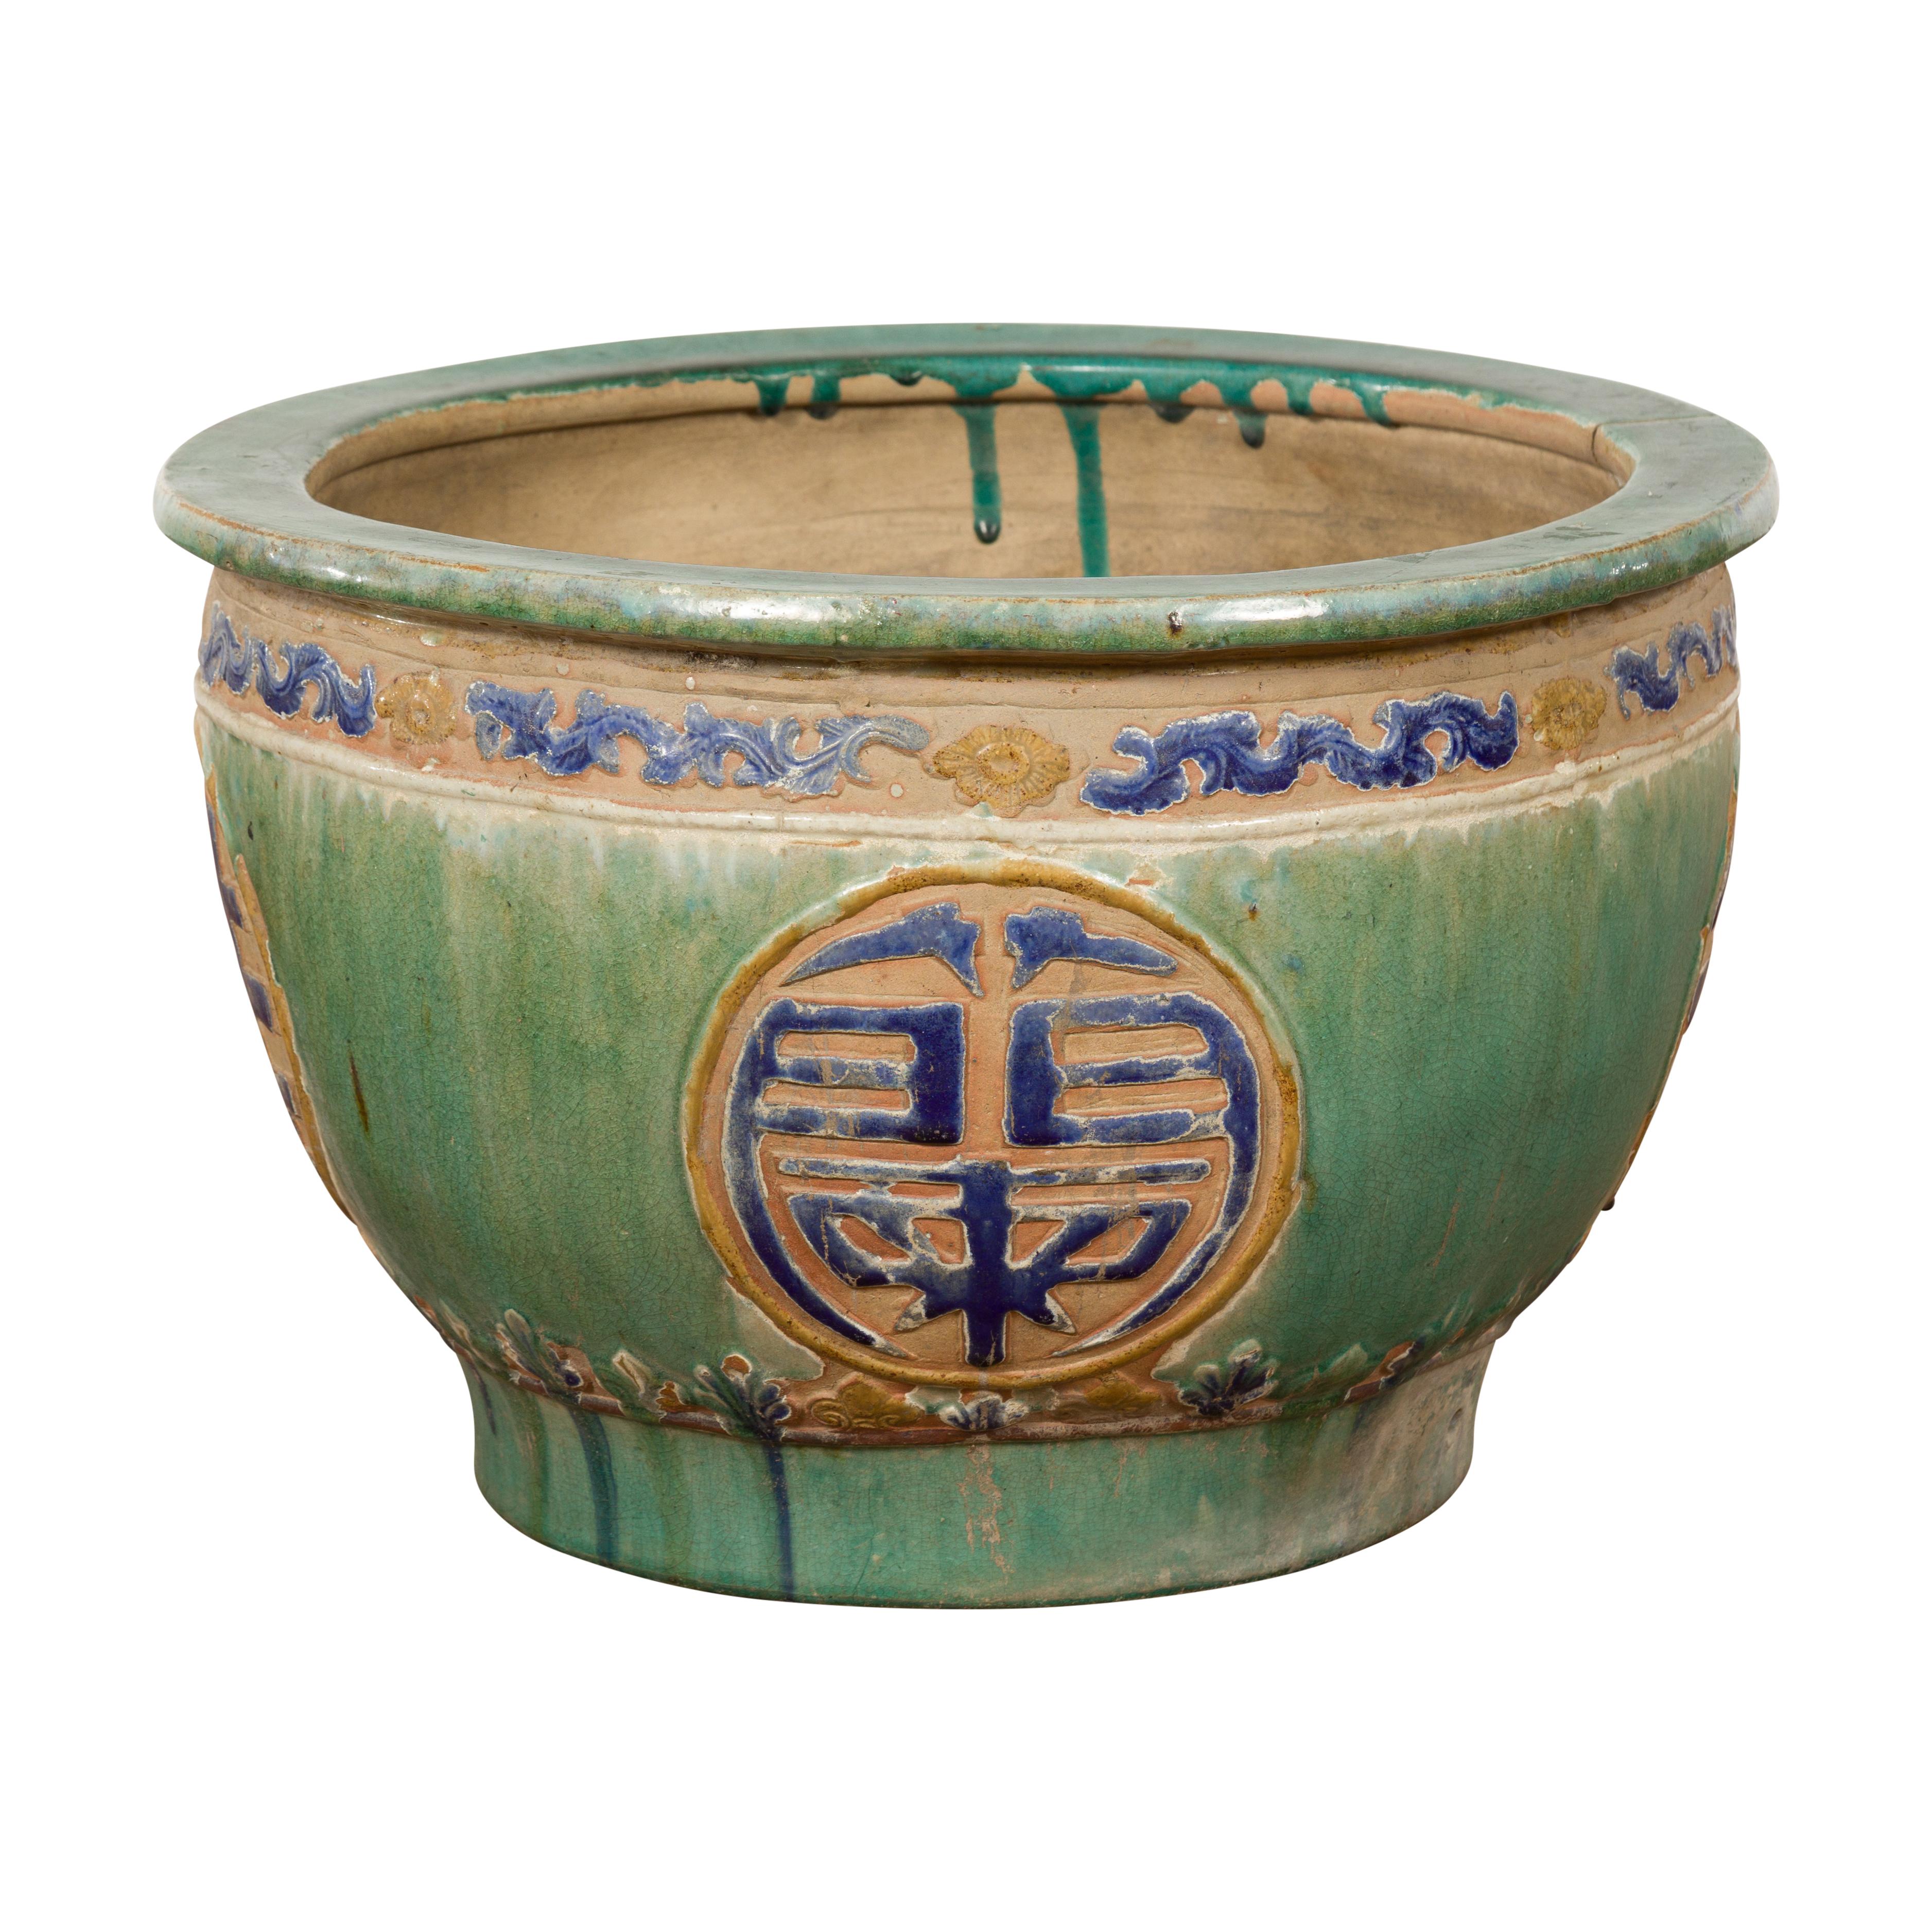 An antique 19th century Annamese green and blue planter from Vietnam with calligraphy in medallions, scrolling clouds frieze and distressed patina. Uncover the timeless beauty of this antique 19th century Annamese planter from Vietnam. Crafted with